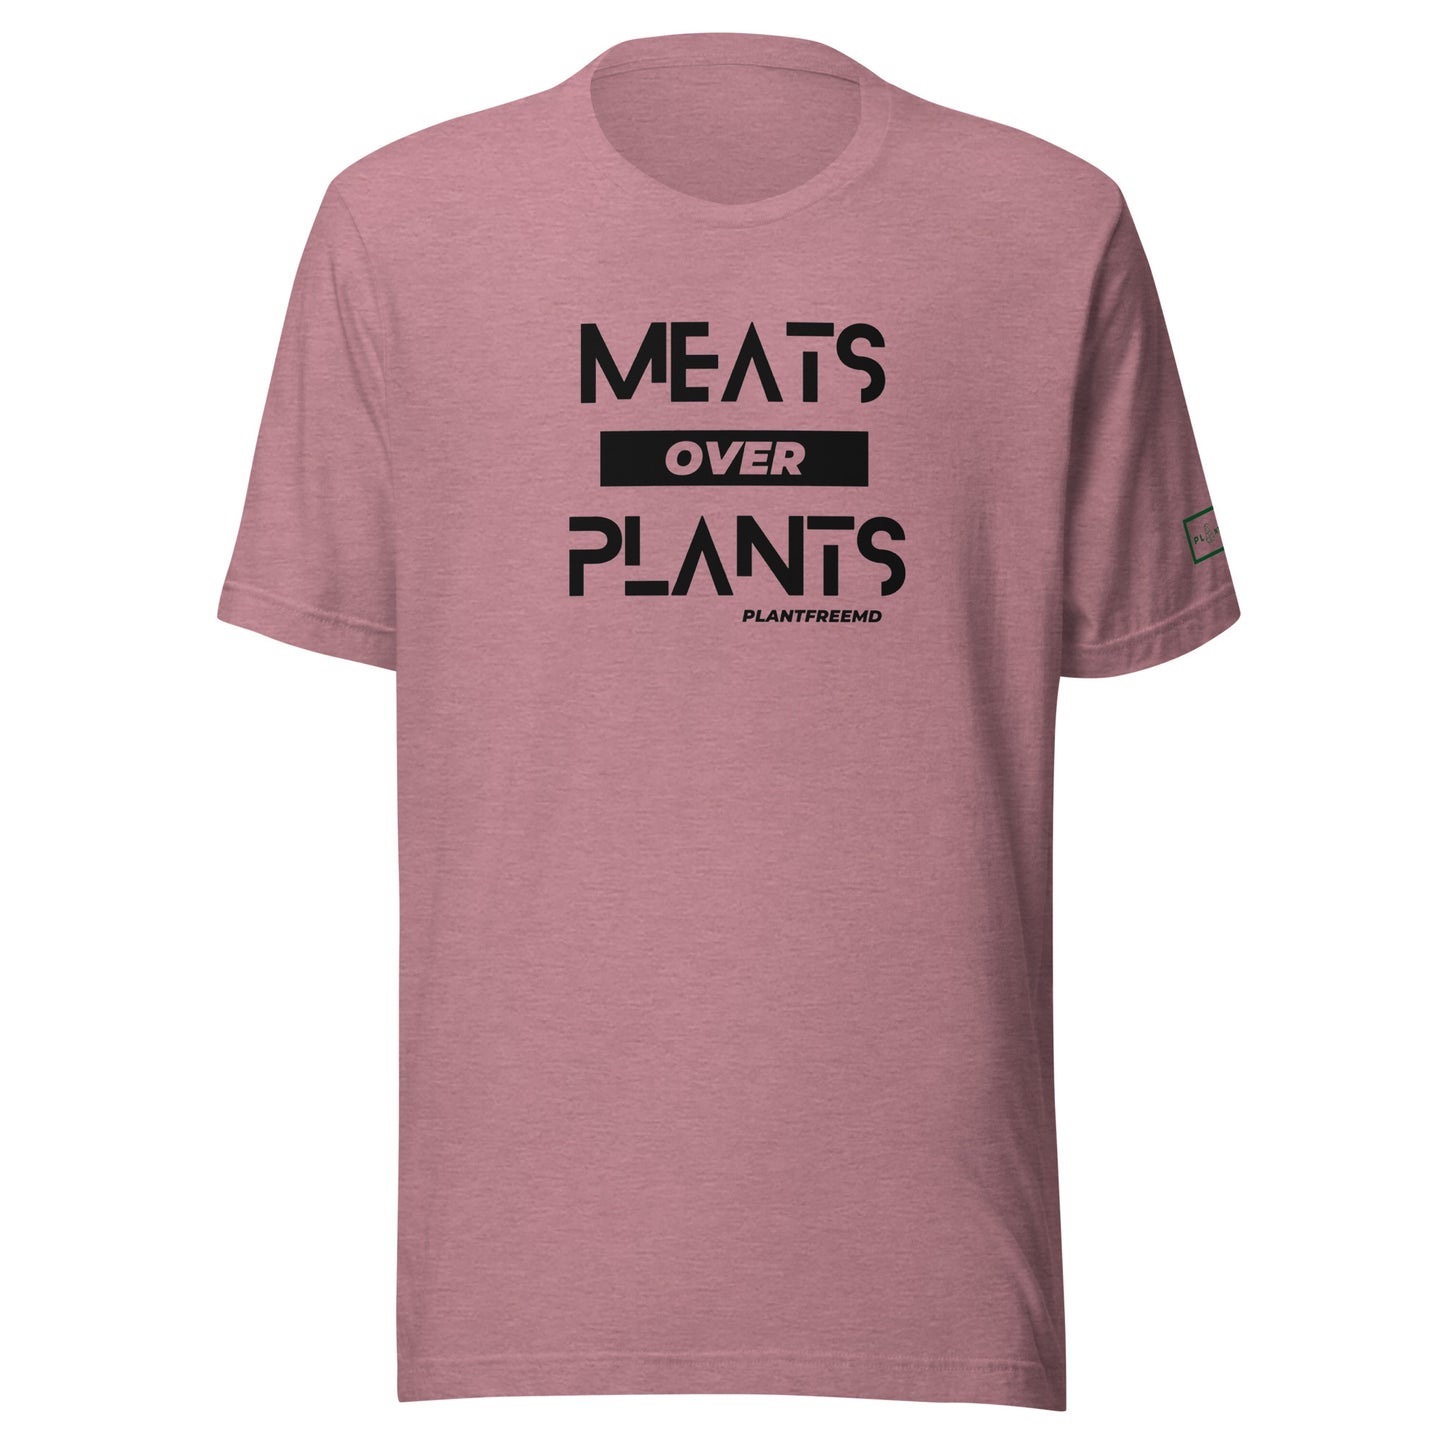 Meats Over Plants Unisex T-shirt Dark w/Embroidery Left Sleeve